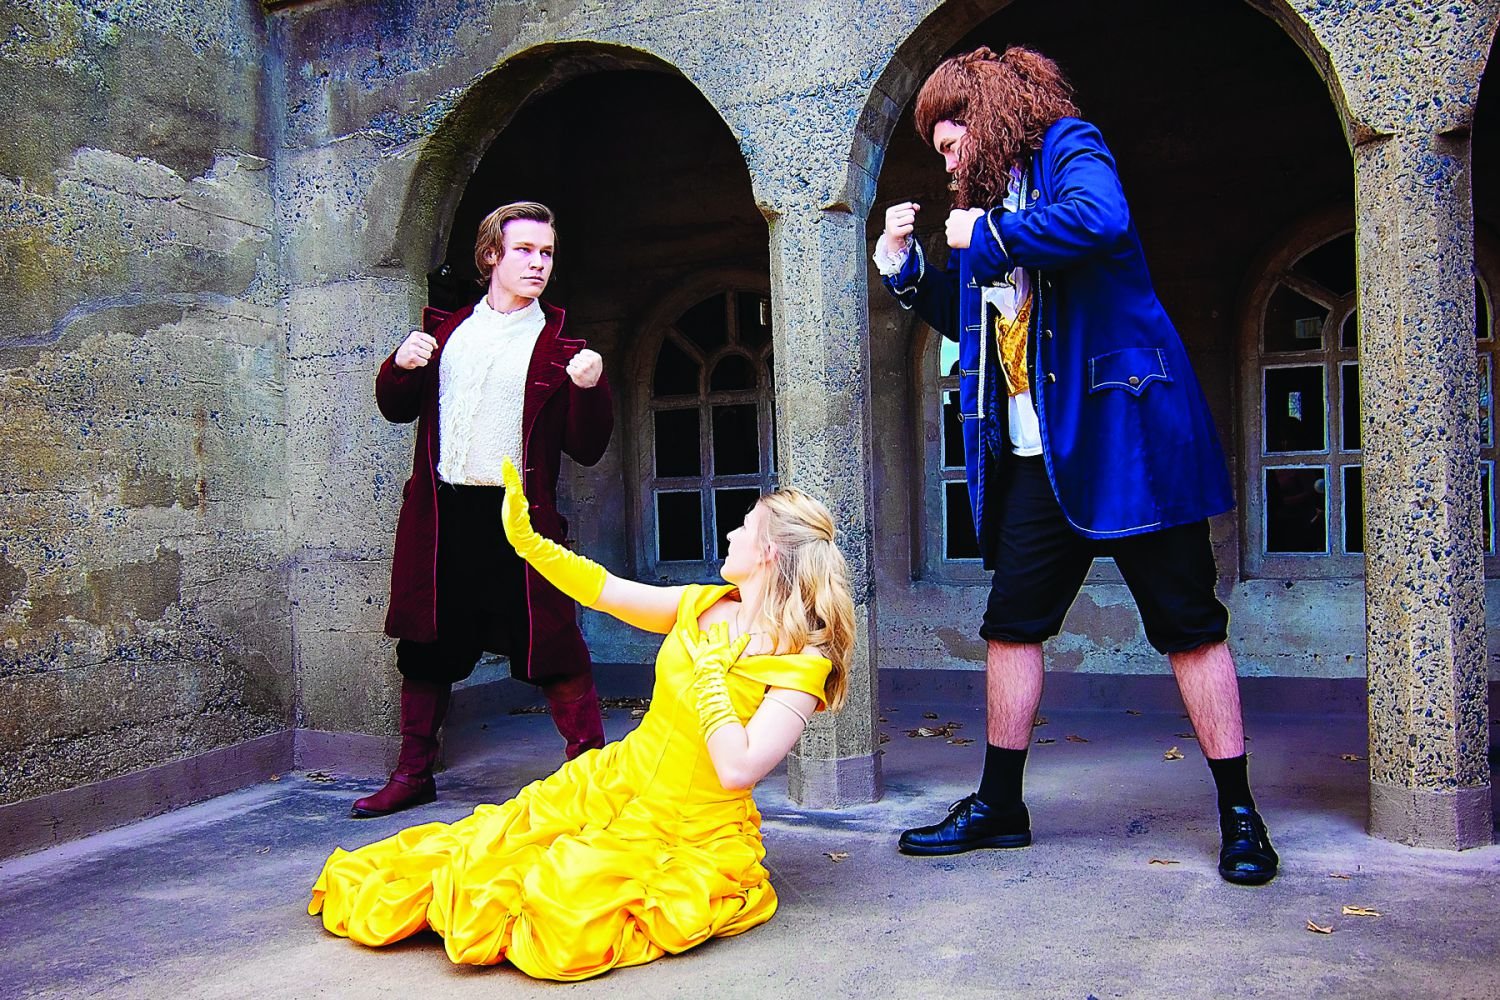 Luke Nitschke as Gaston, Taylor Mitchell as Belle and Grant Nalty as Beast star in “Beauty and the Beast” at CB West. Photograph by Jessica Briggs Photography.